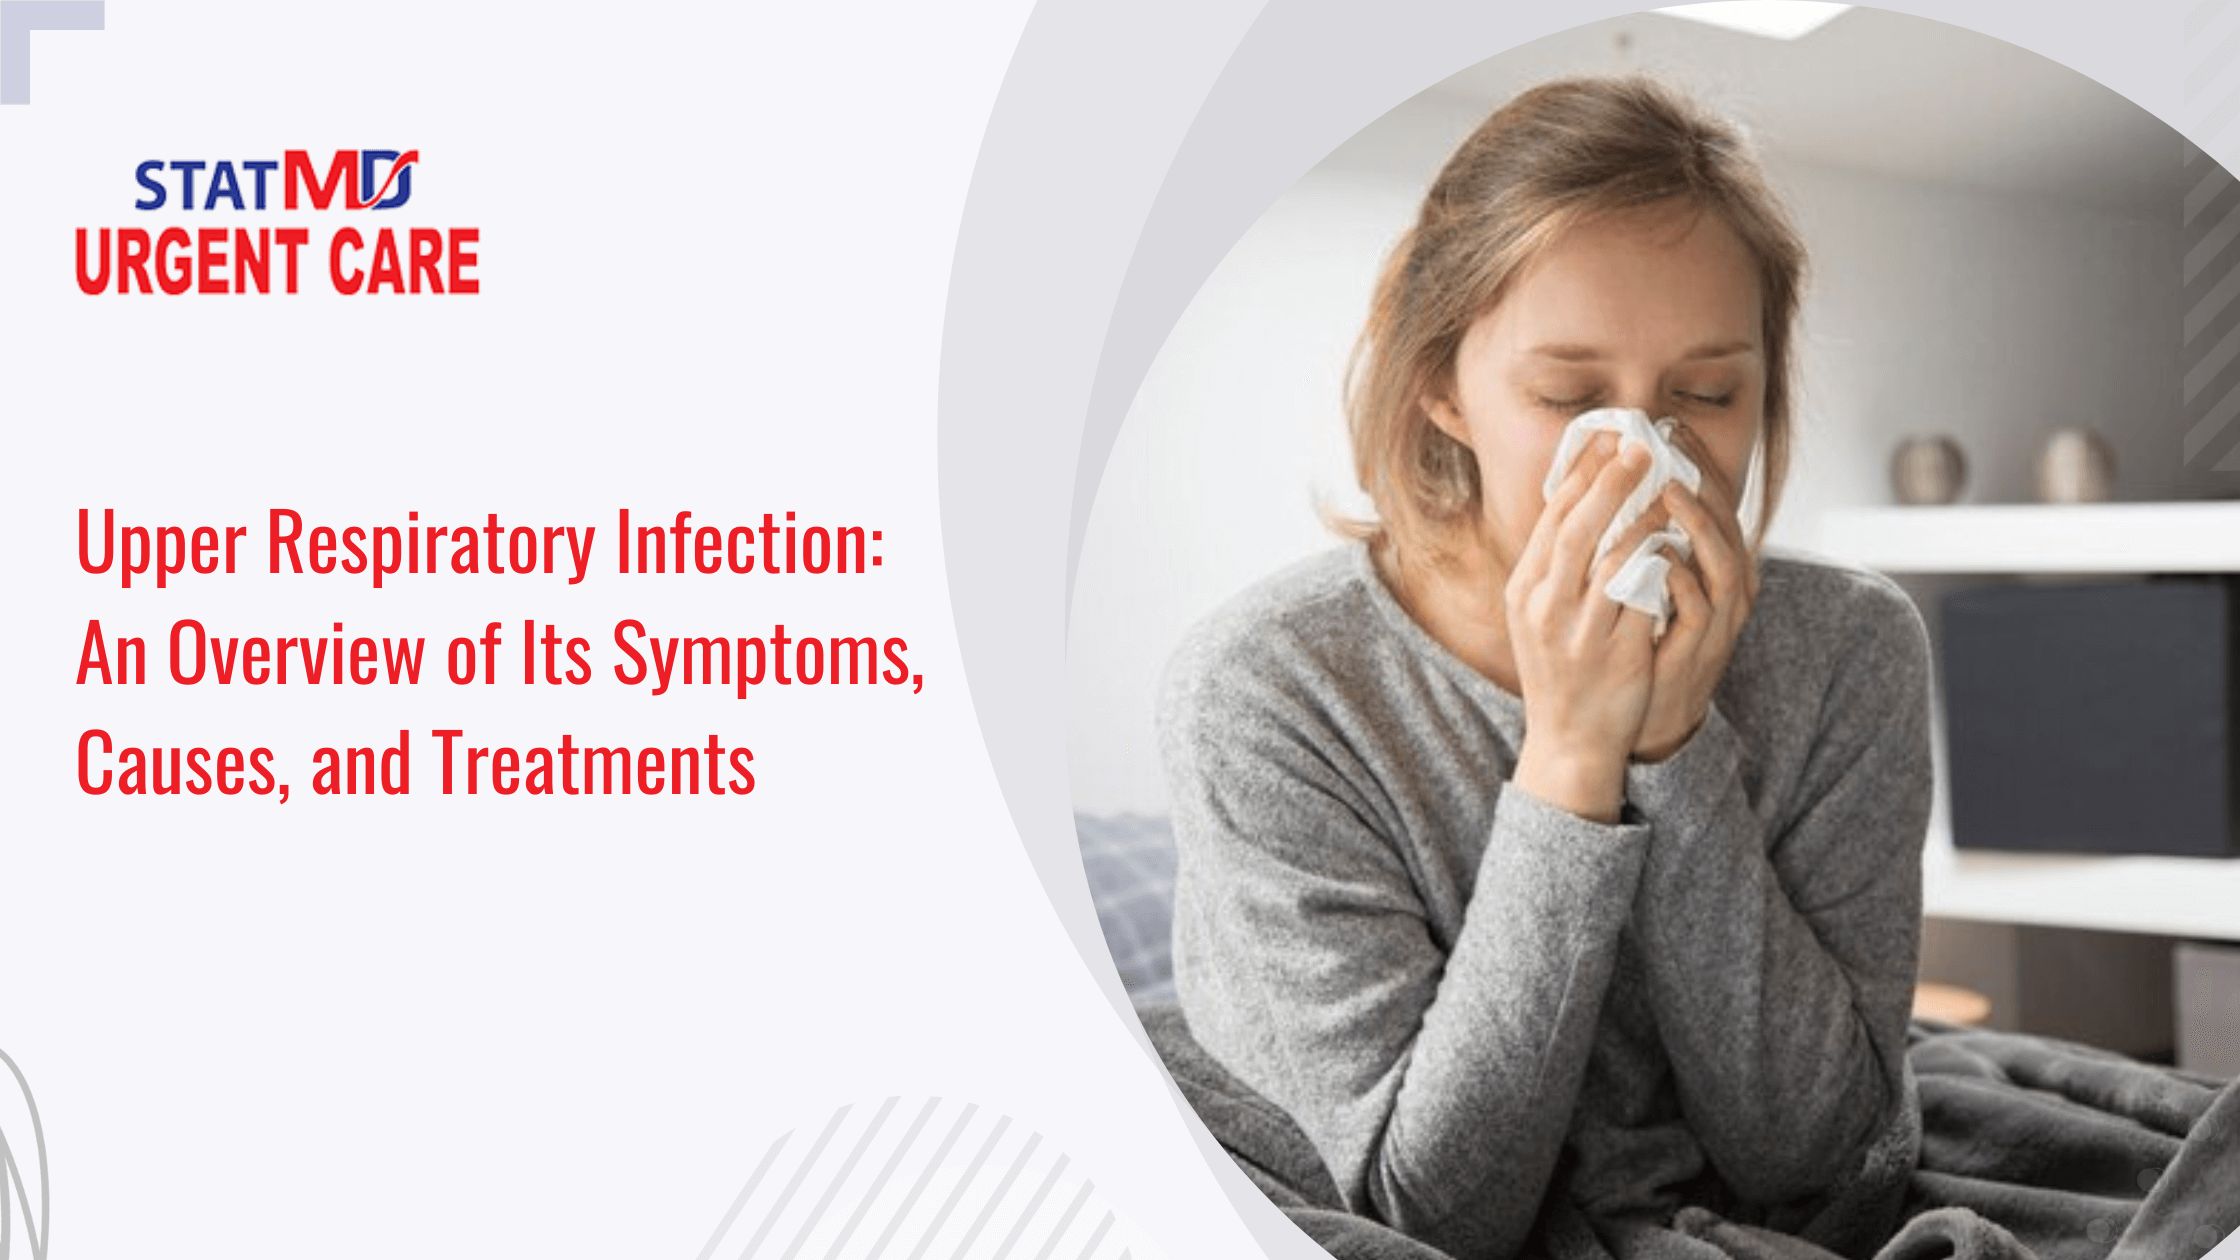 Upper Respiratory Infection: An Overview of Its Symptoms, Causes, and Treatments